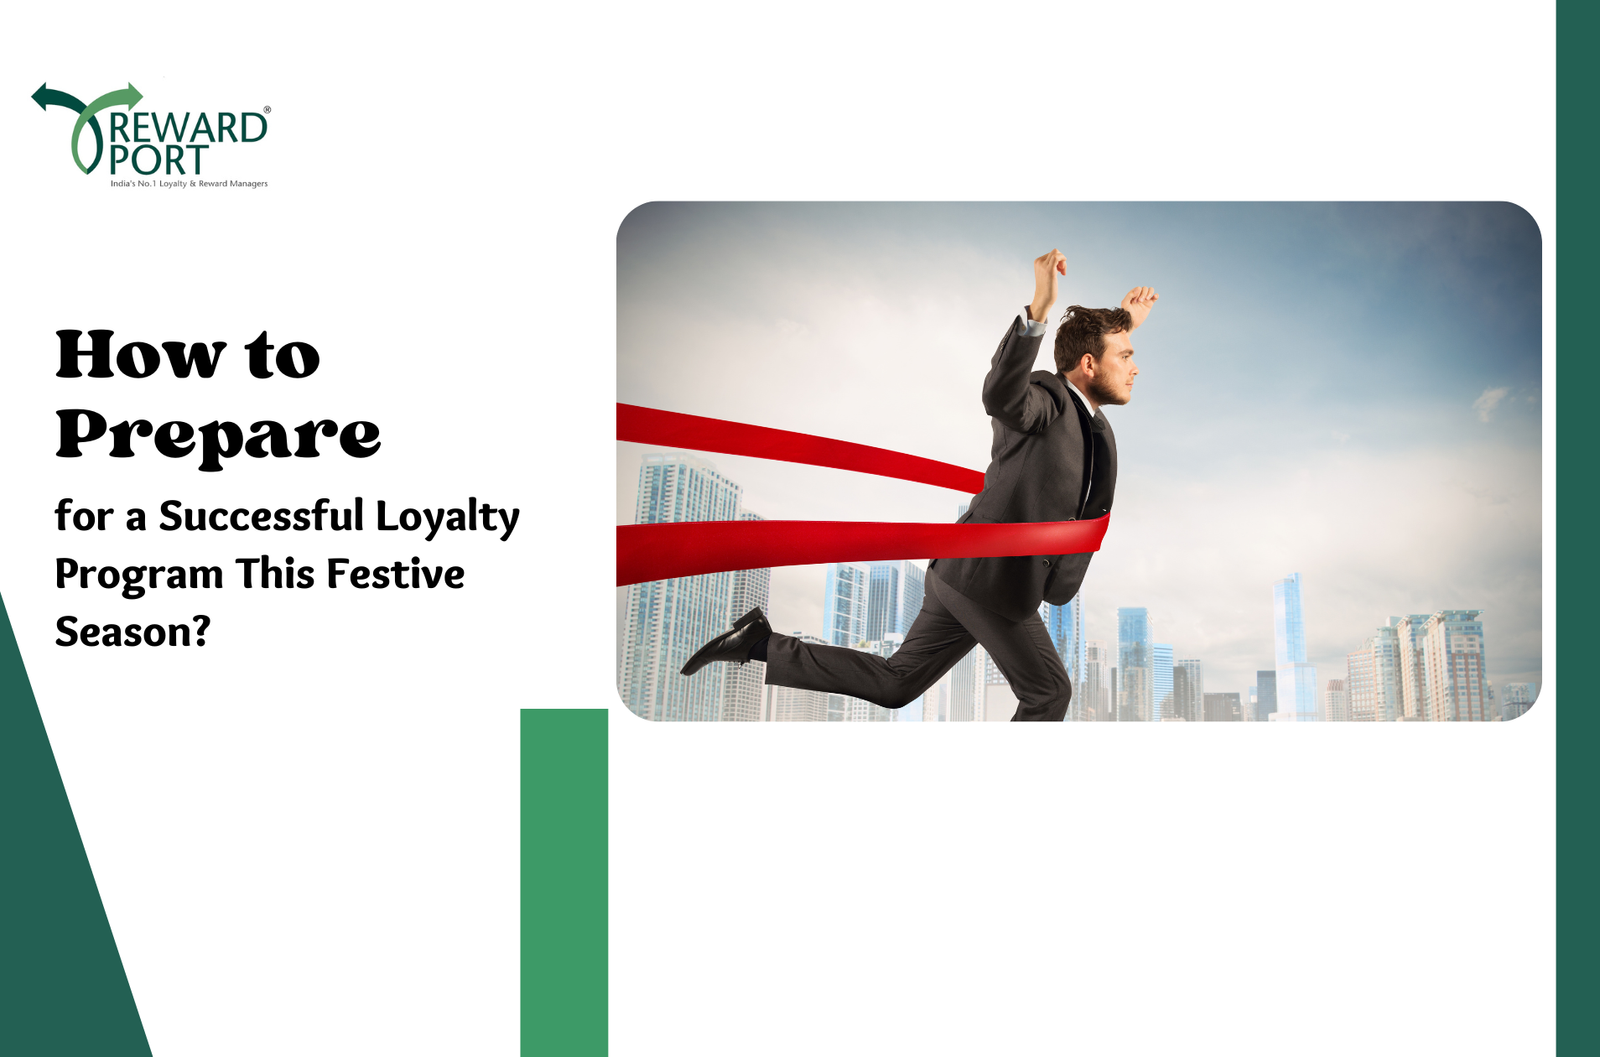 How to Prepare for a Successful Loyalty Program This Festive Season